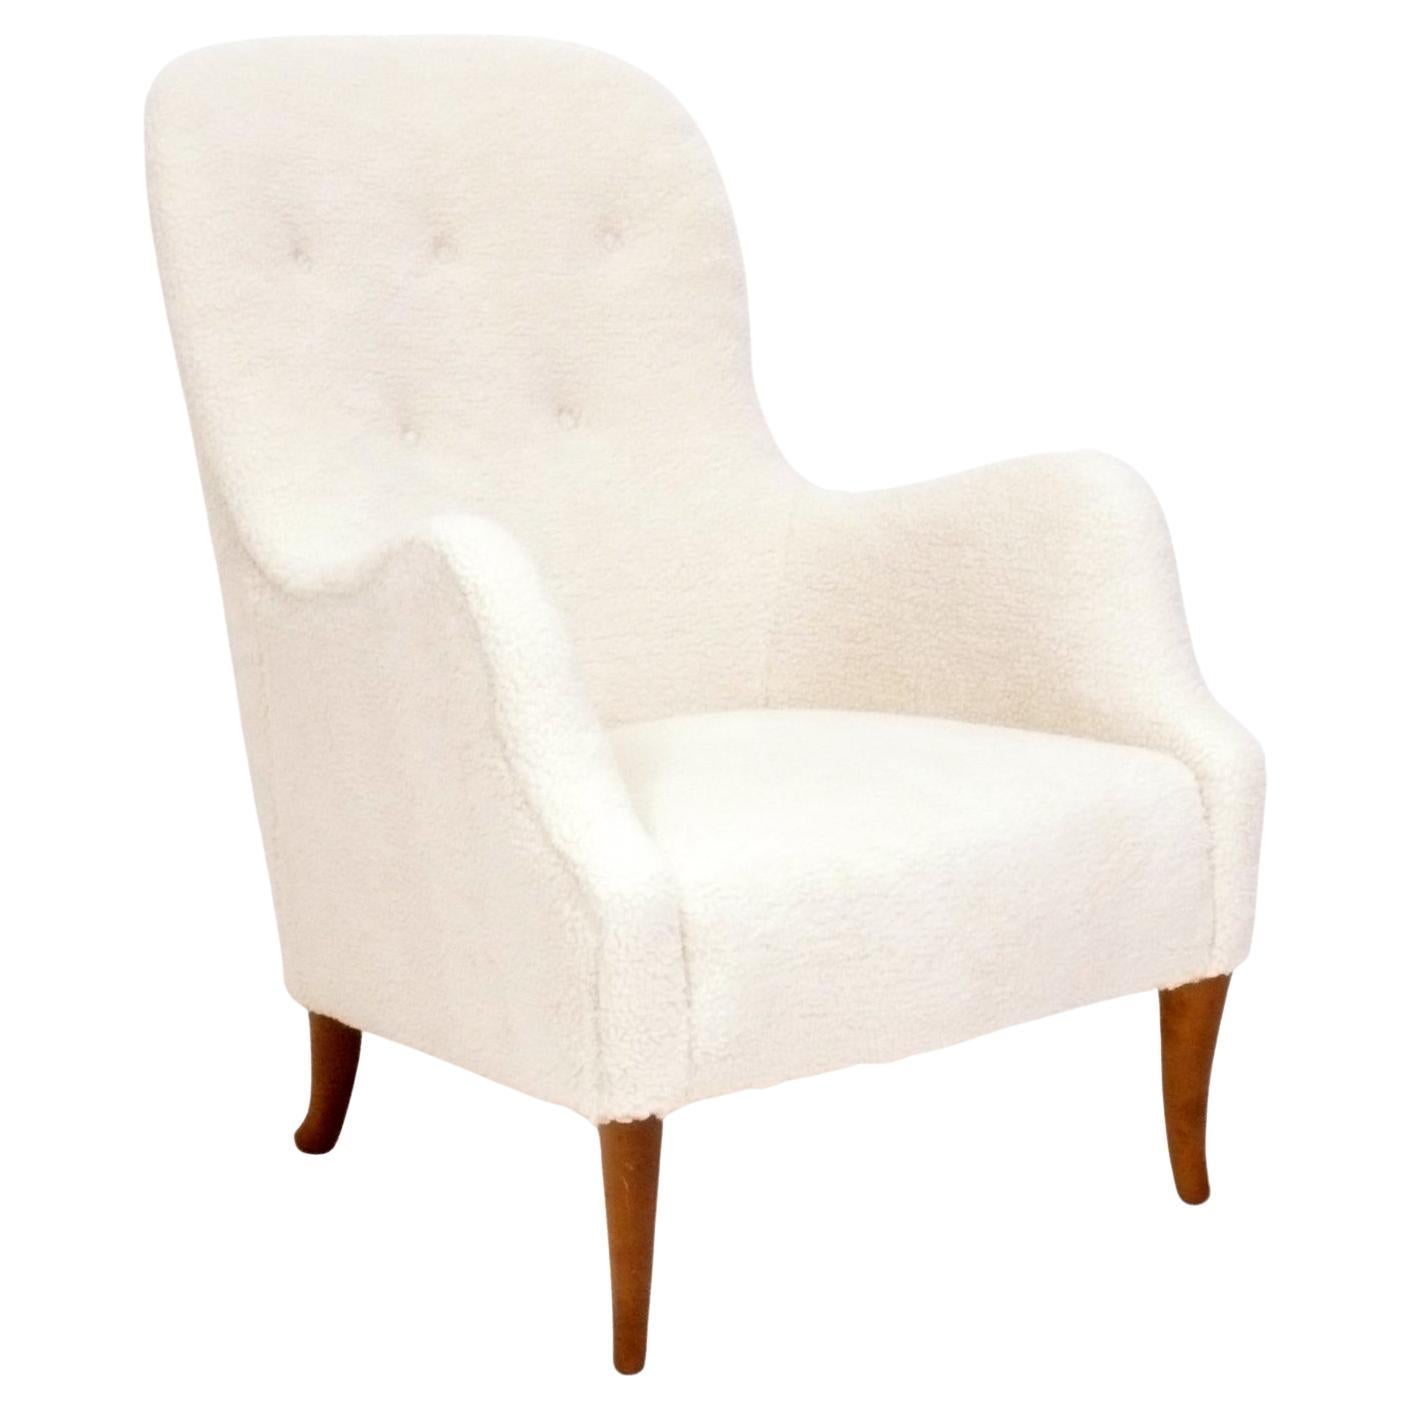 Danish Modern Lounge Chair Upholstered in Faux Sheepskin For Sale